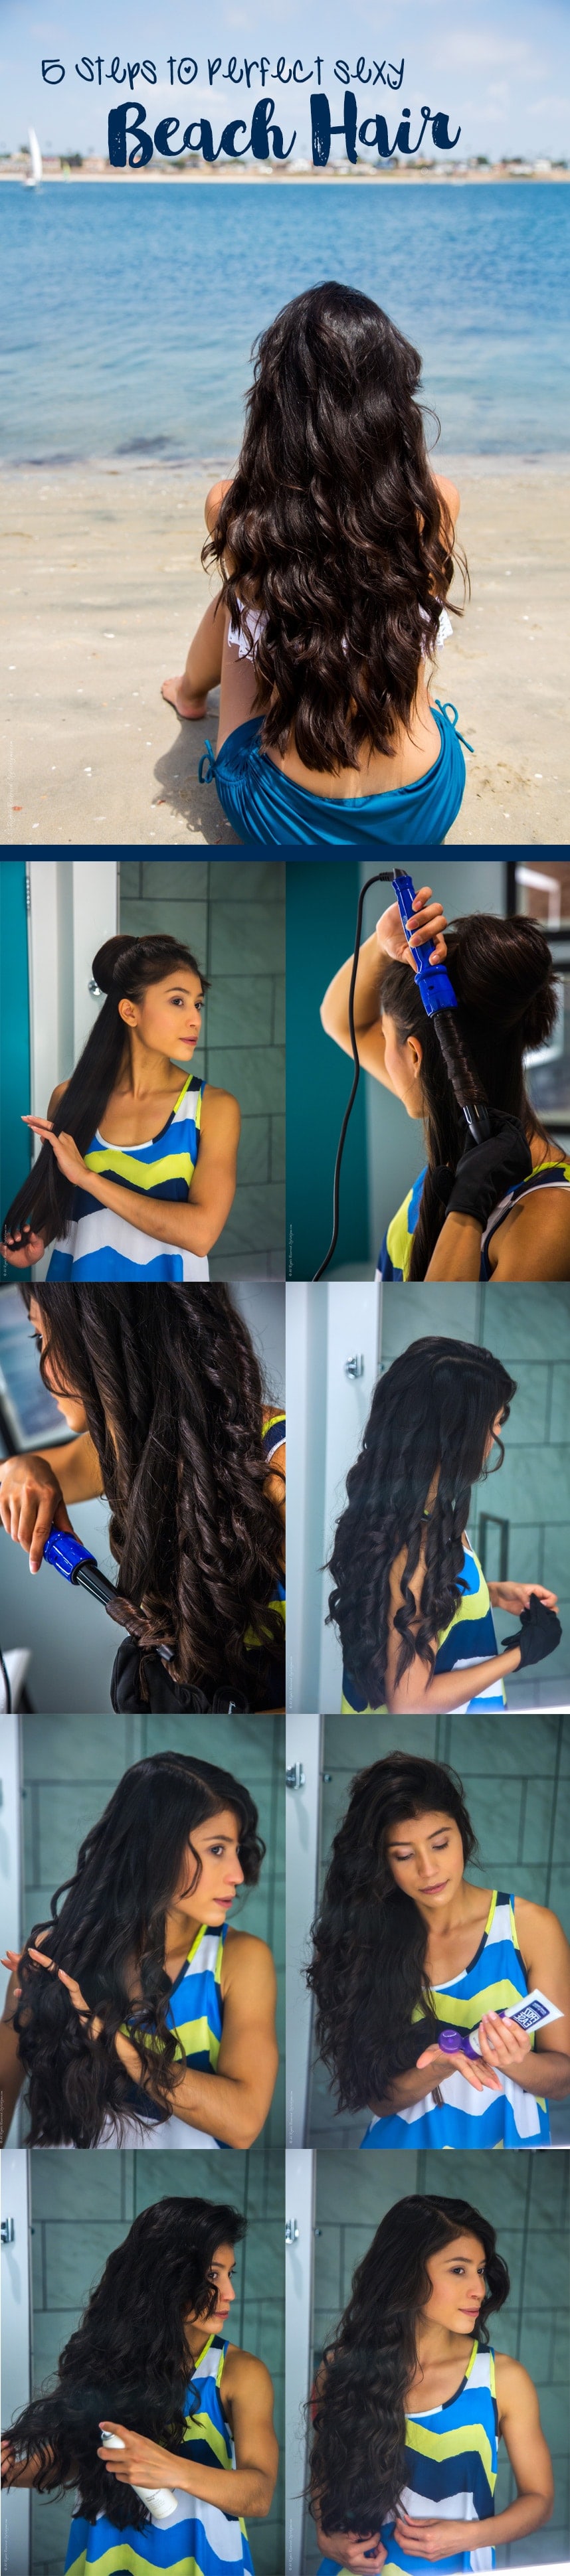 5 Steps to Perfect Sexy Beachy Wavy Hair - Visit Stylishlyme.com for the details